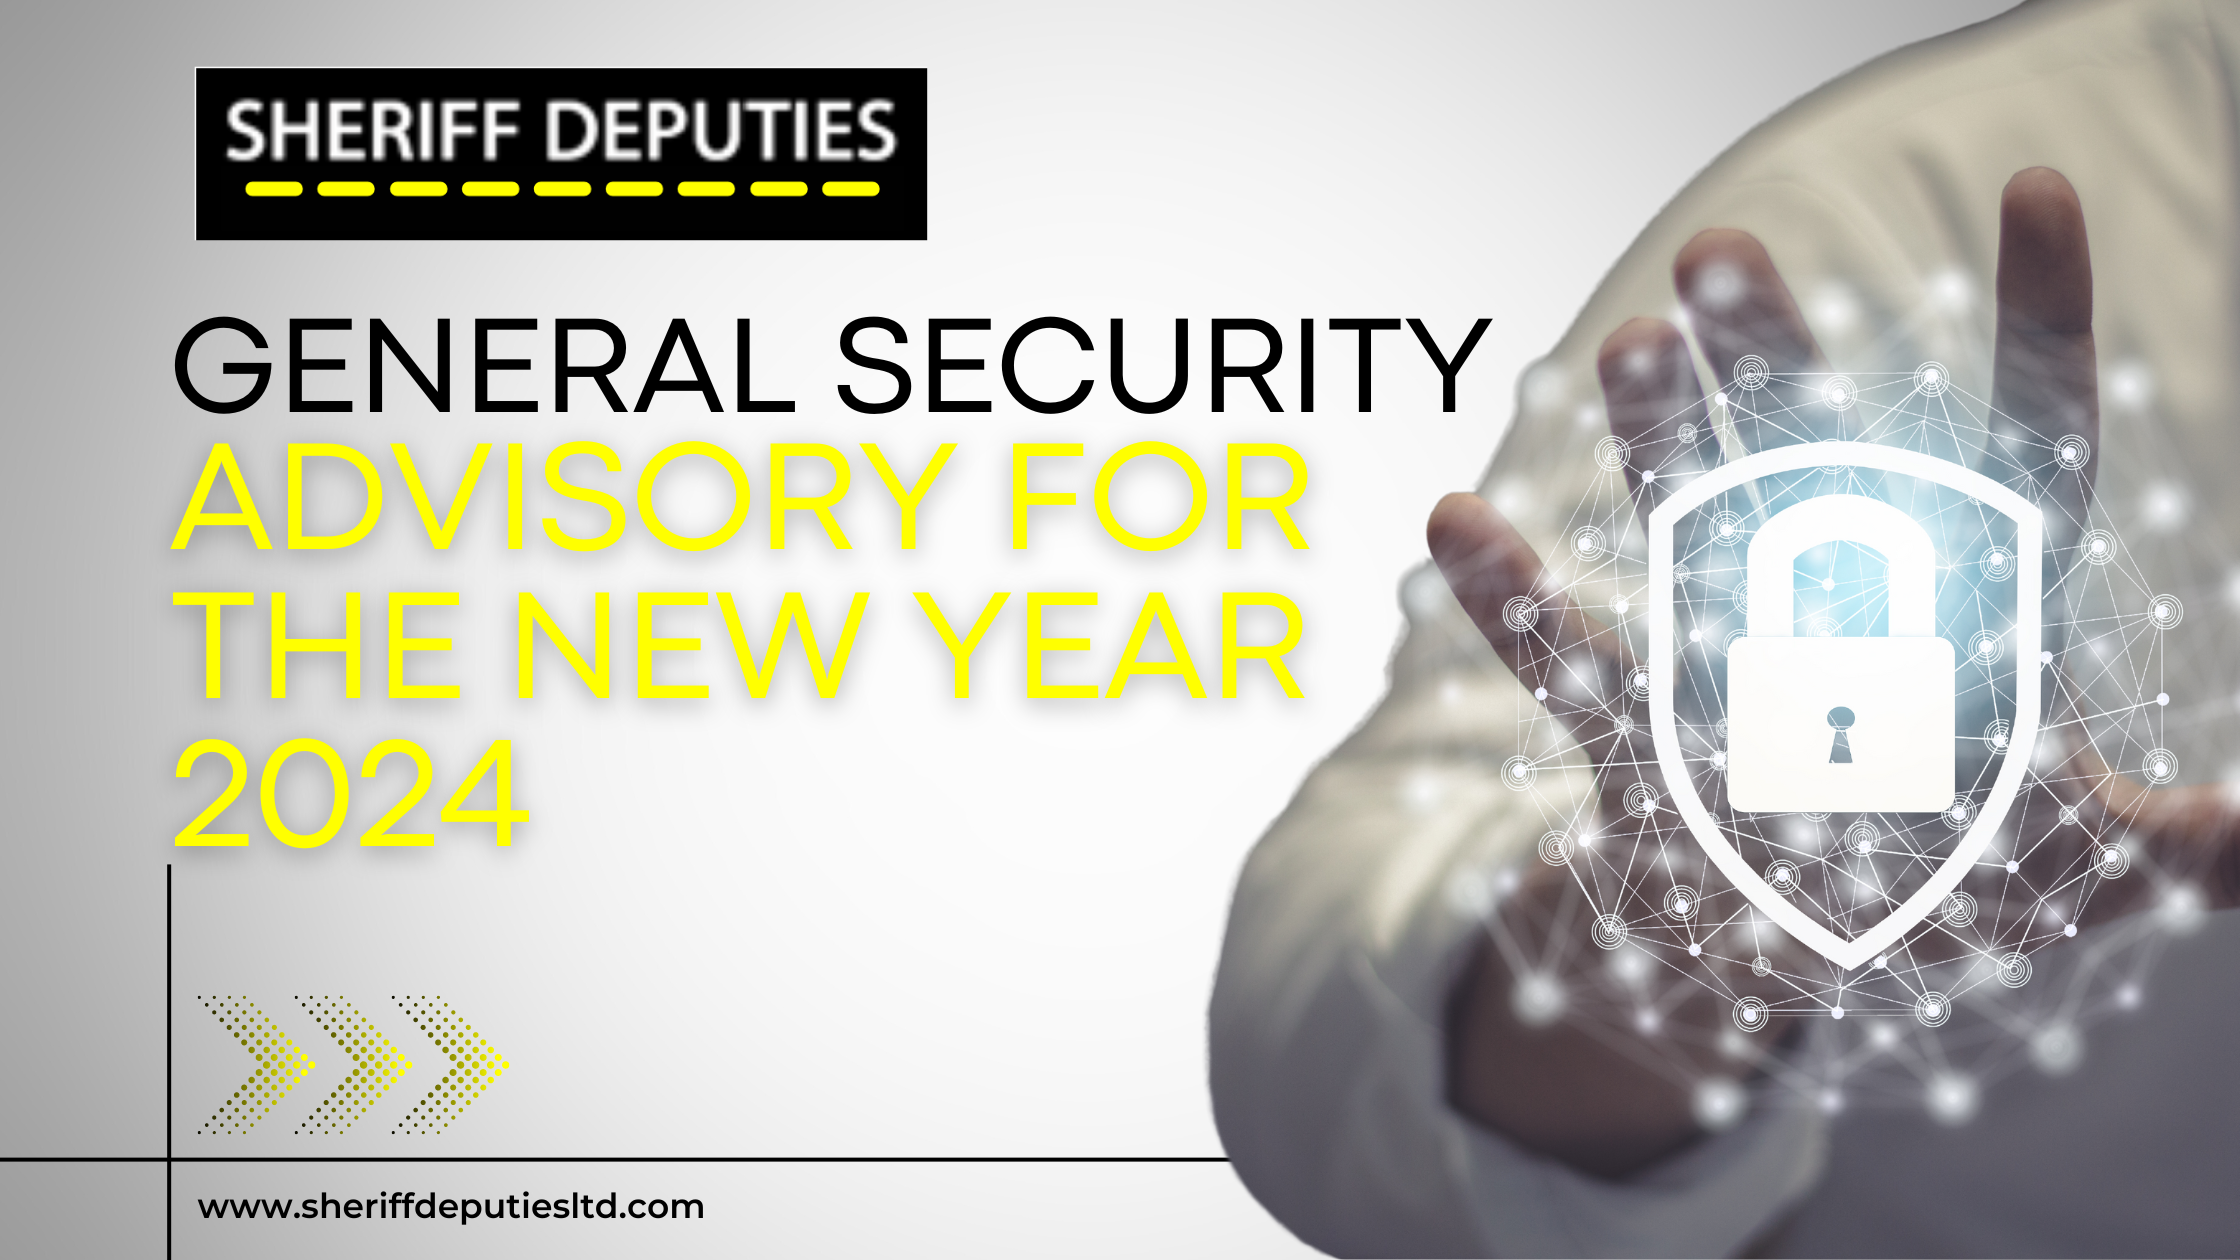 GENERAL SECURITY ADVISORY FOR THE NEW YEAR 2024